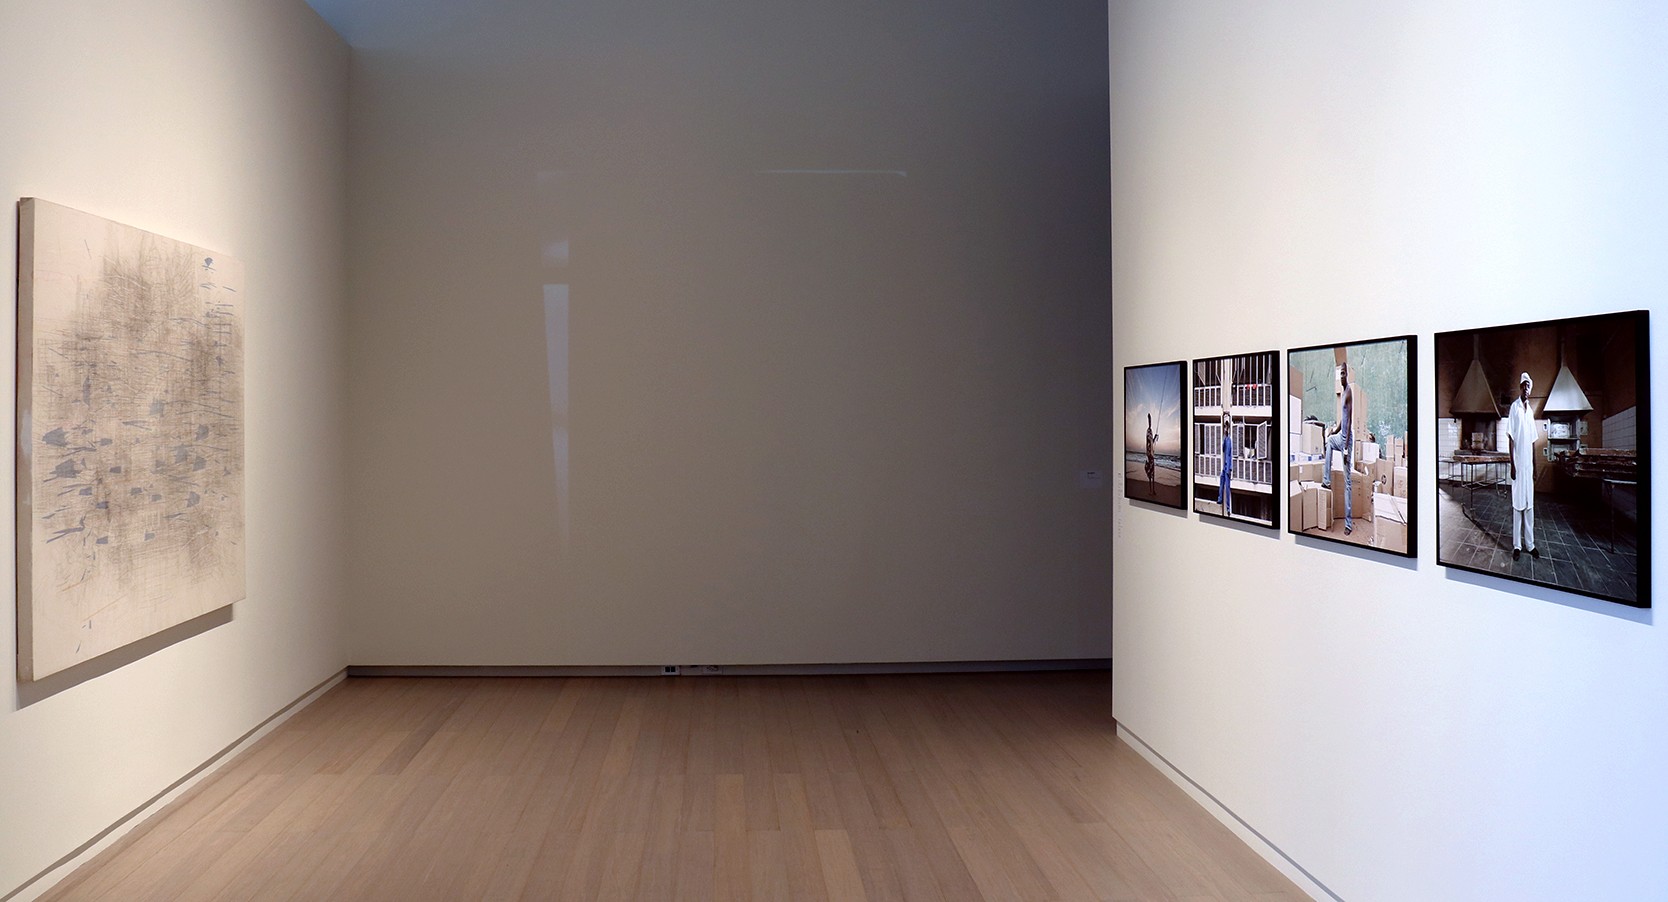 ​​Installation view of the After the End Exhibition, on view at the Wallach Art Gallery, Columbia University June 15 – October 6, 2019. Photograph by Eddie José Bartolomei. Courtesy the Wallach Art Gallery.